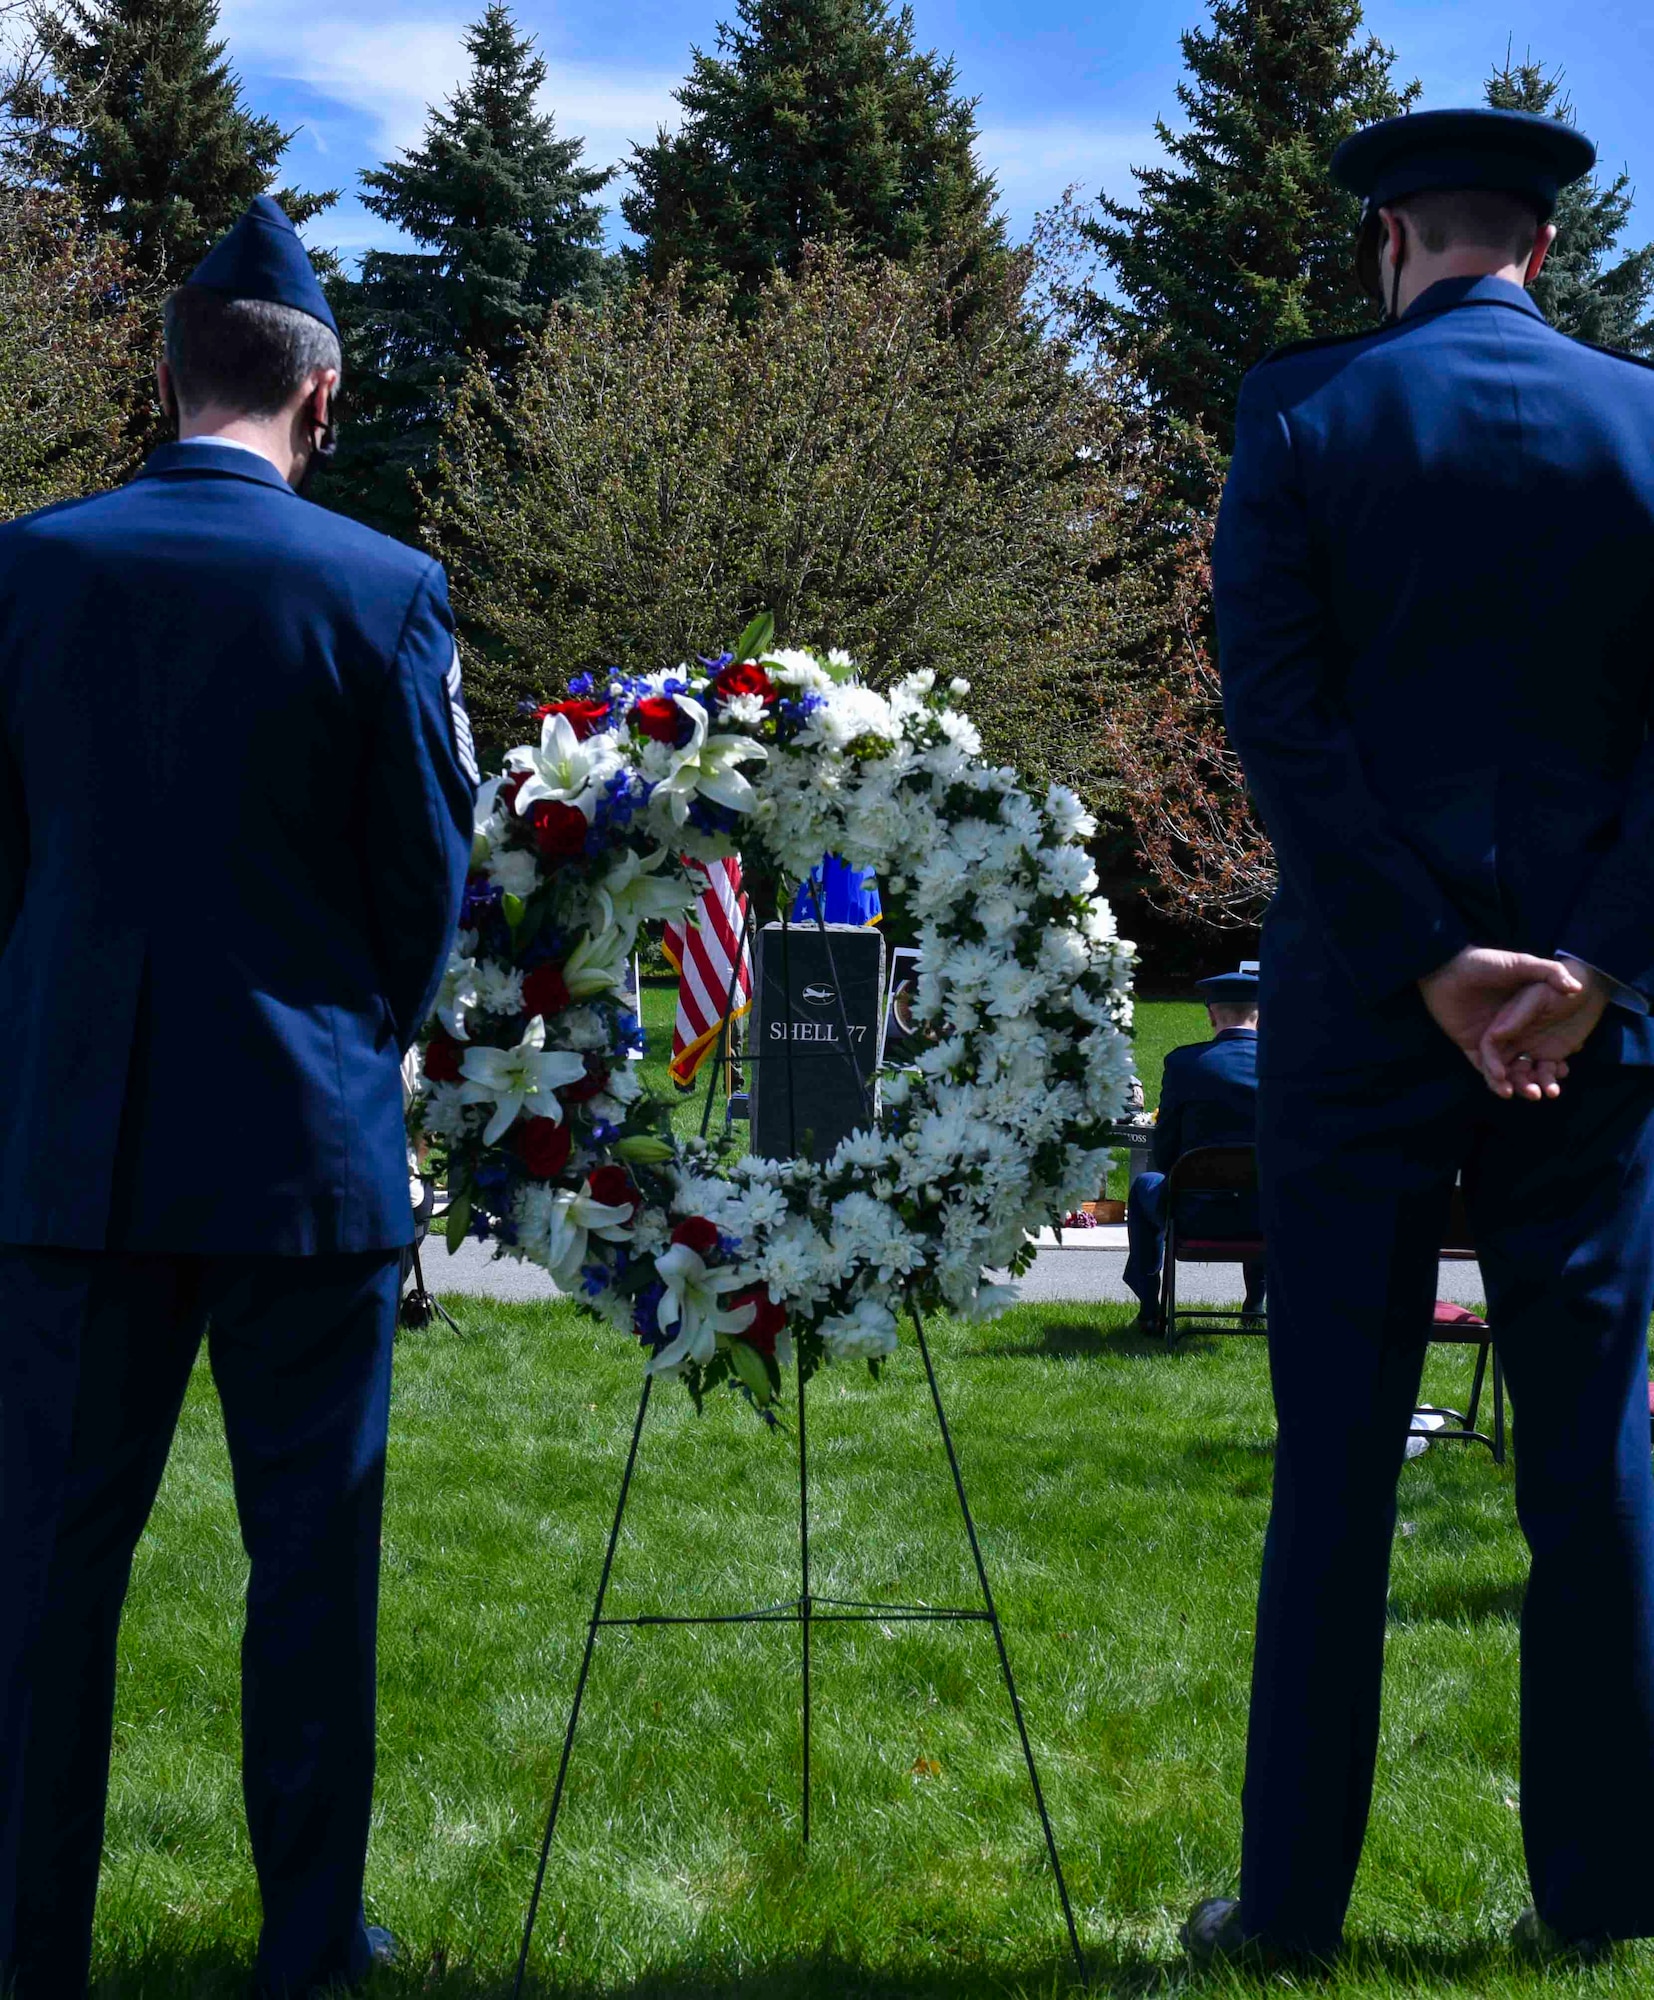 U.S. Air Force Lt. Col. Kevin Parsons, 93rd Air Refueling Squadron commander, and Senior Master Ryan Sgt. Clauss, 93rd Air Refueling Squadron superintendent, pause for a moment of silence during the Shell 77 Memorial, May 4, 2020, on Fairchild Air Force Base, Wash.